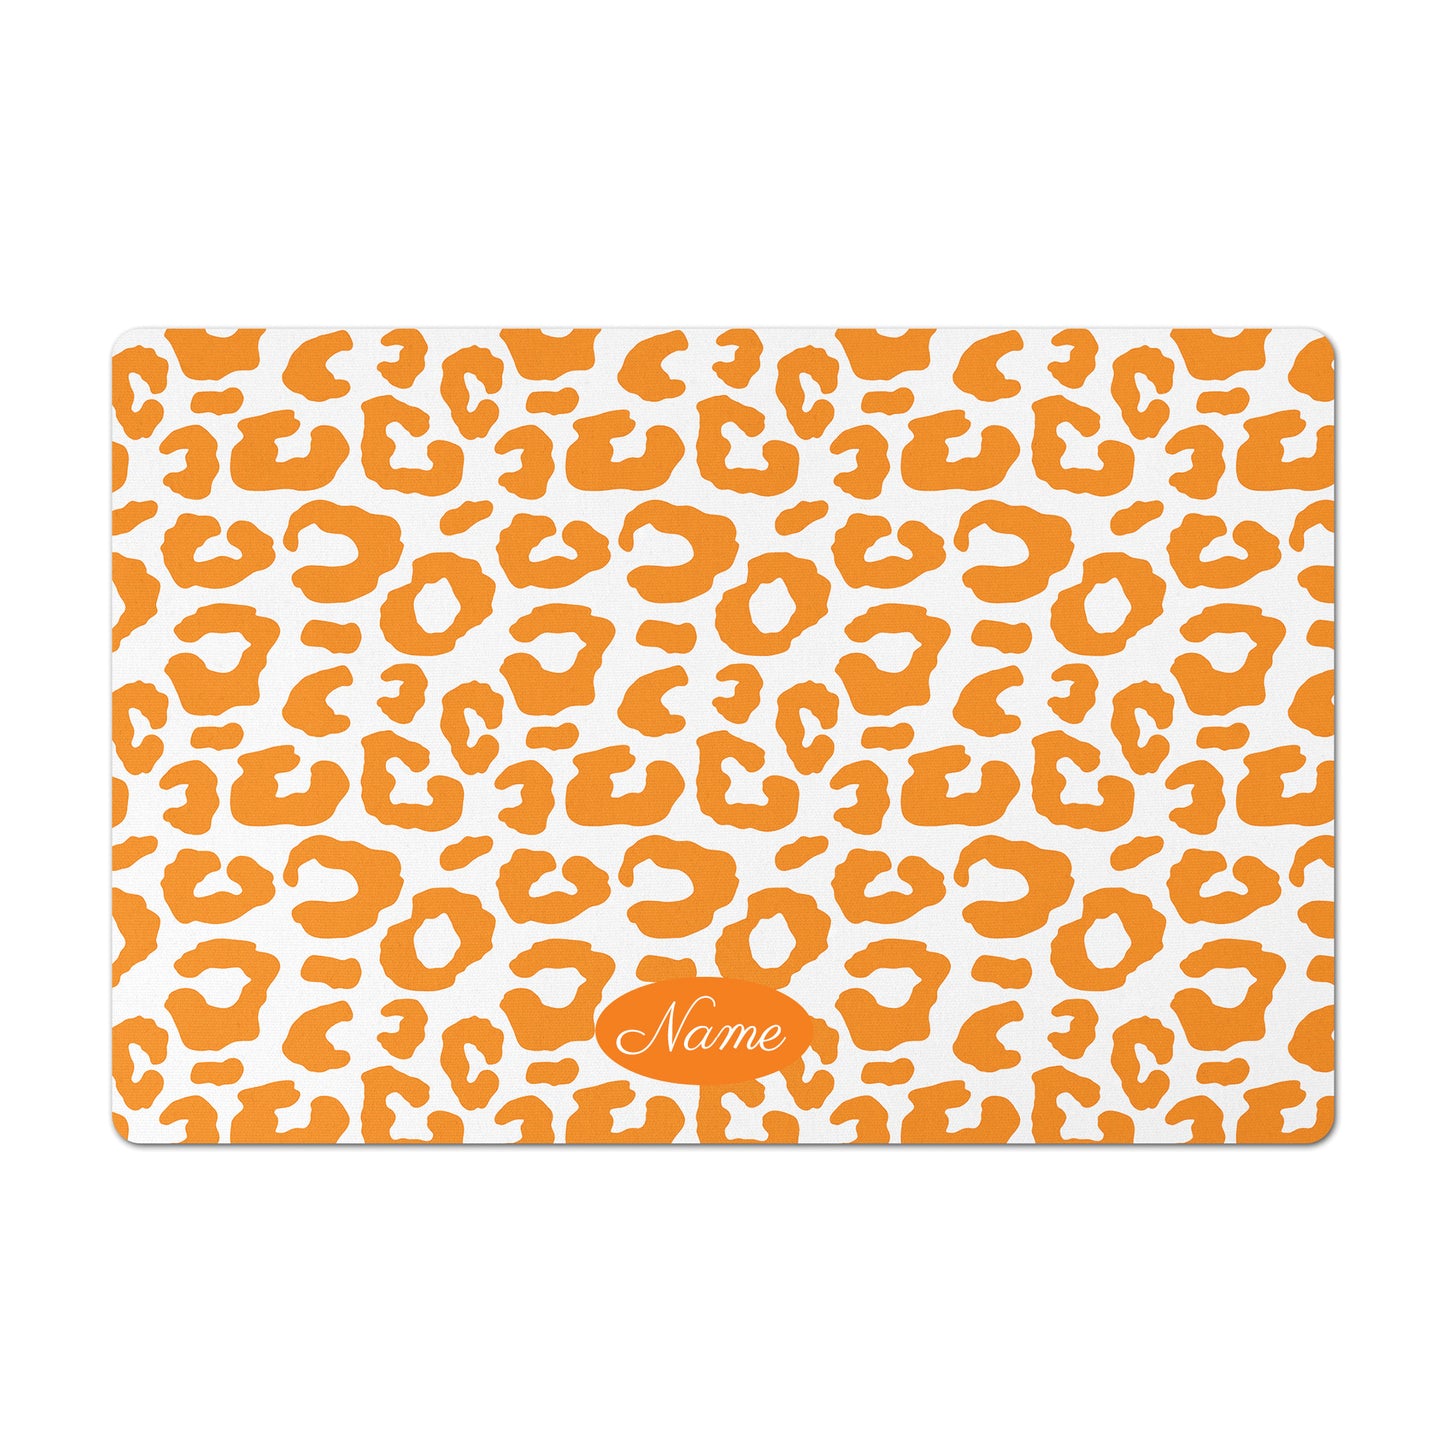 Personalized Leopard Pet Bowl Mat, Orange and White